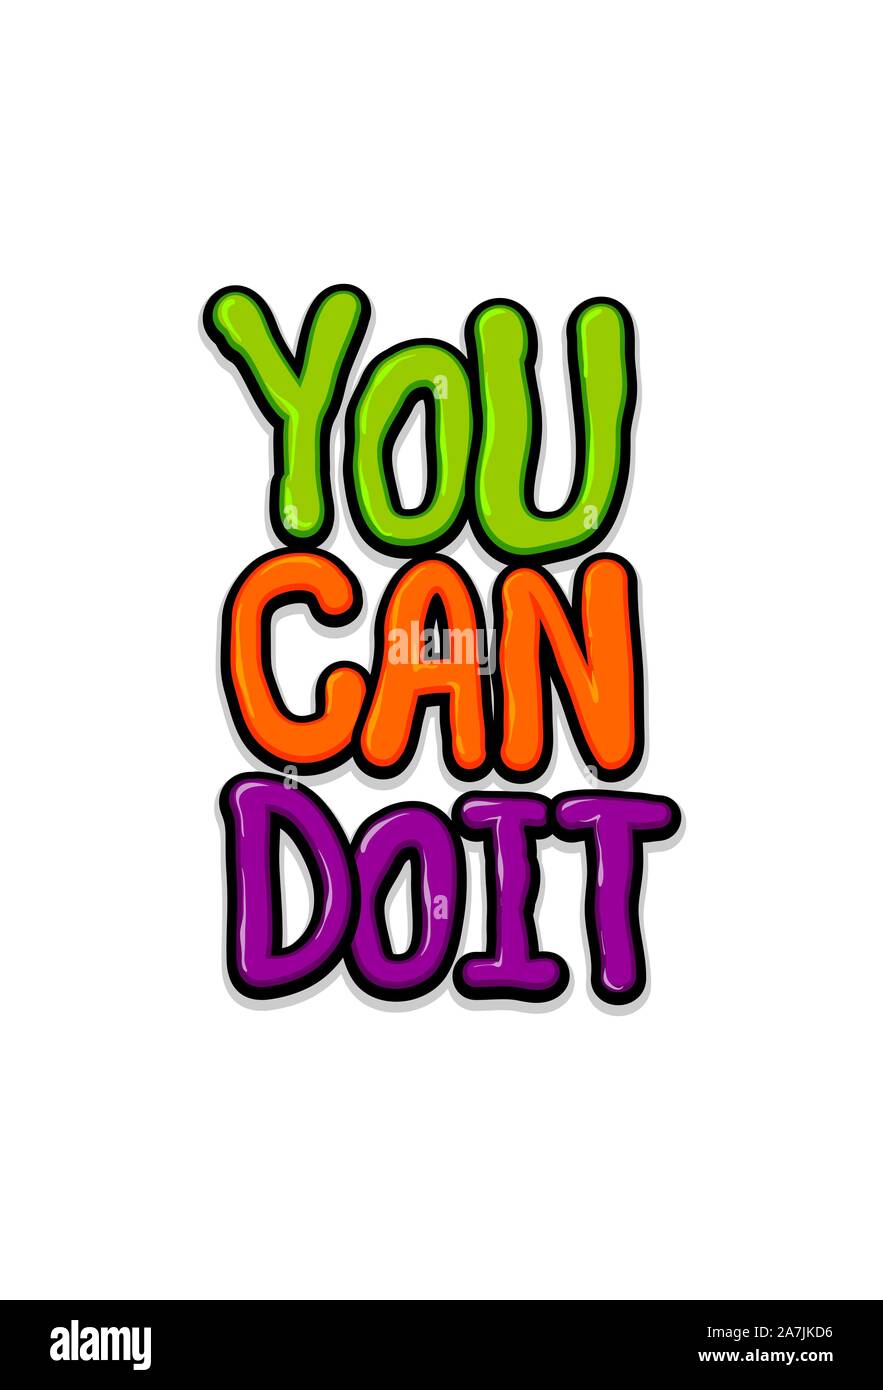 You can Do It glossy motivation text lettering Stock Vector